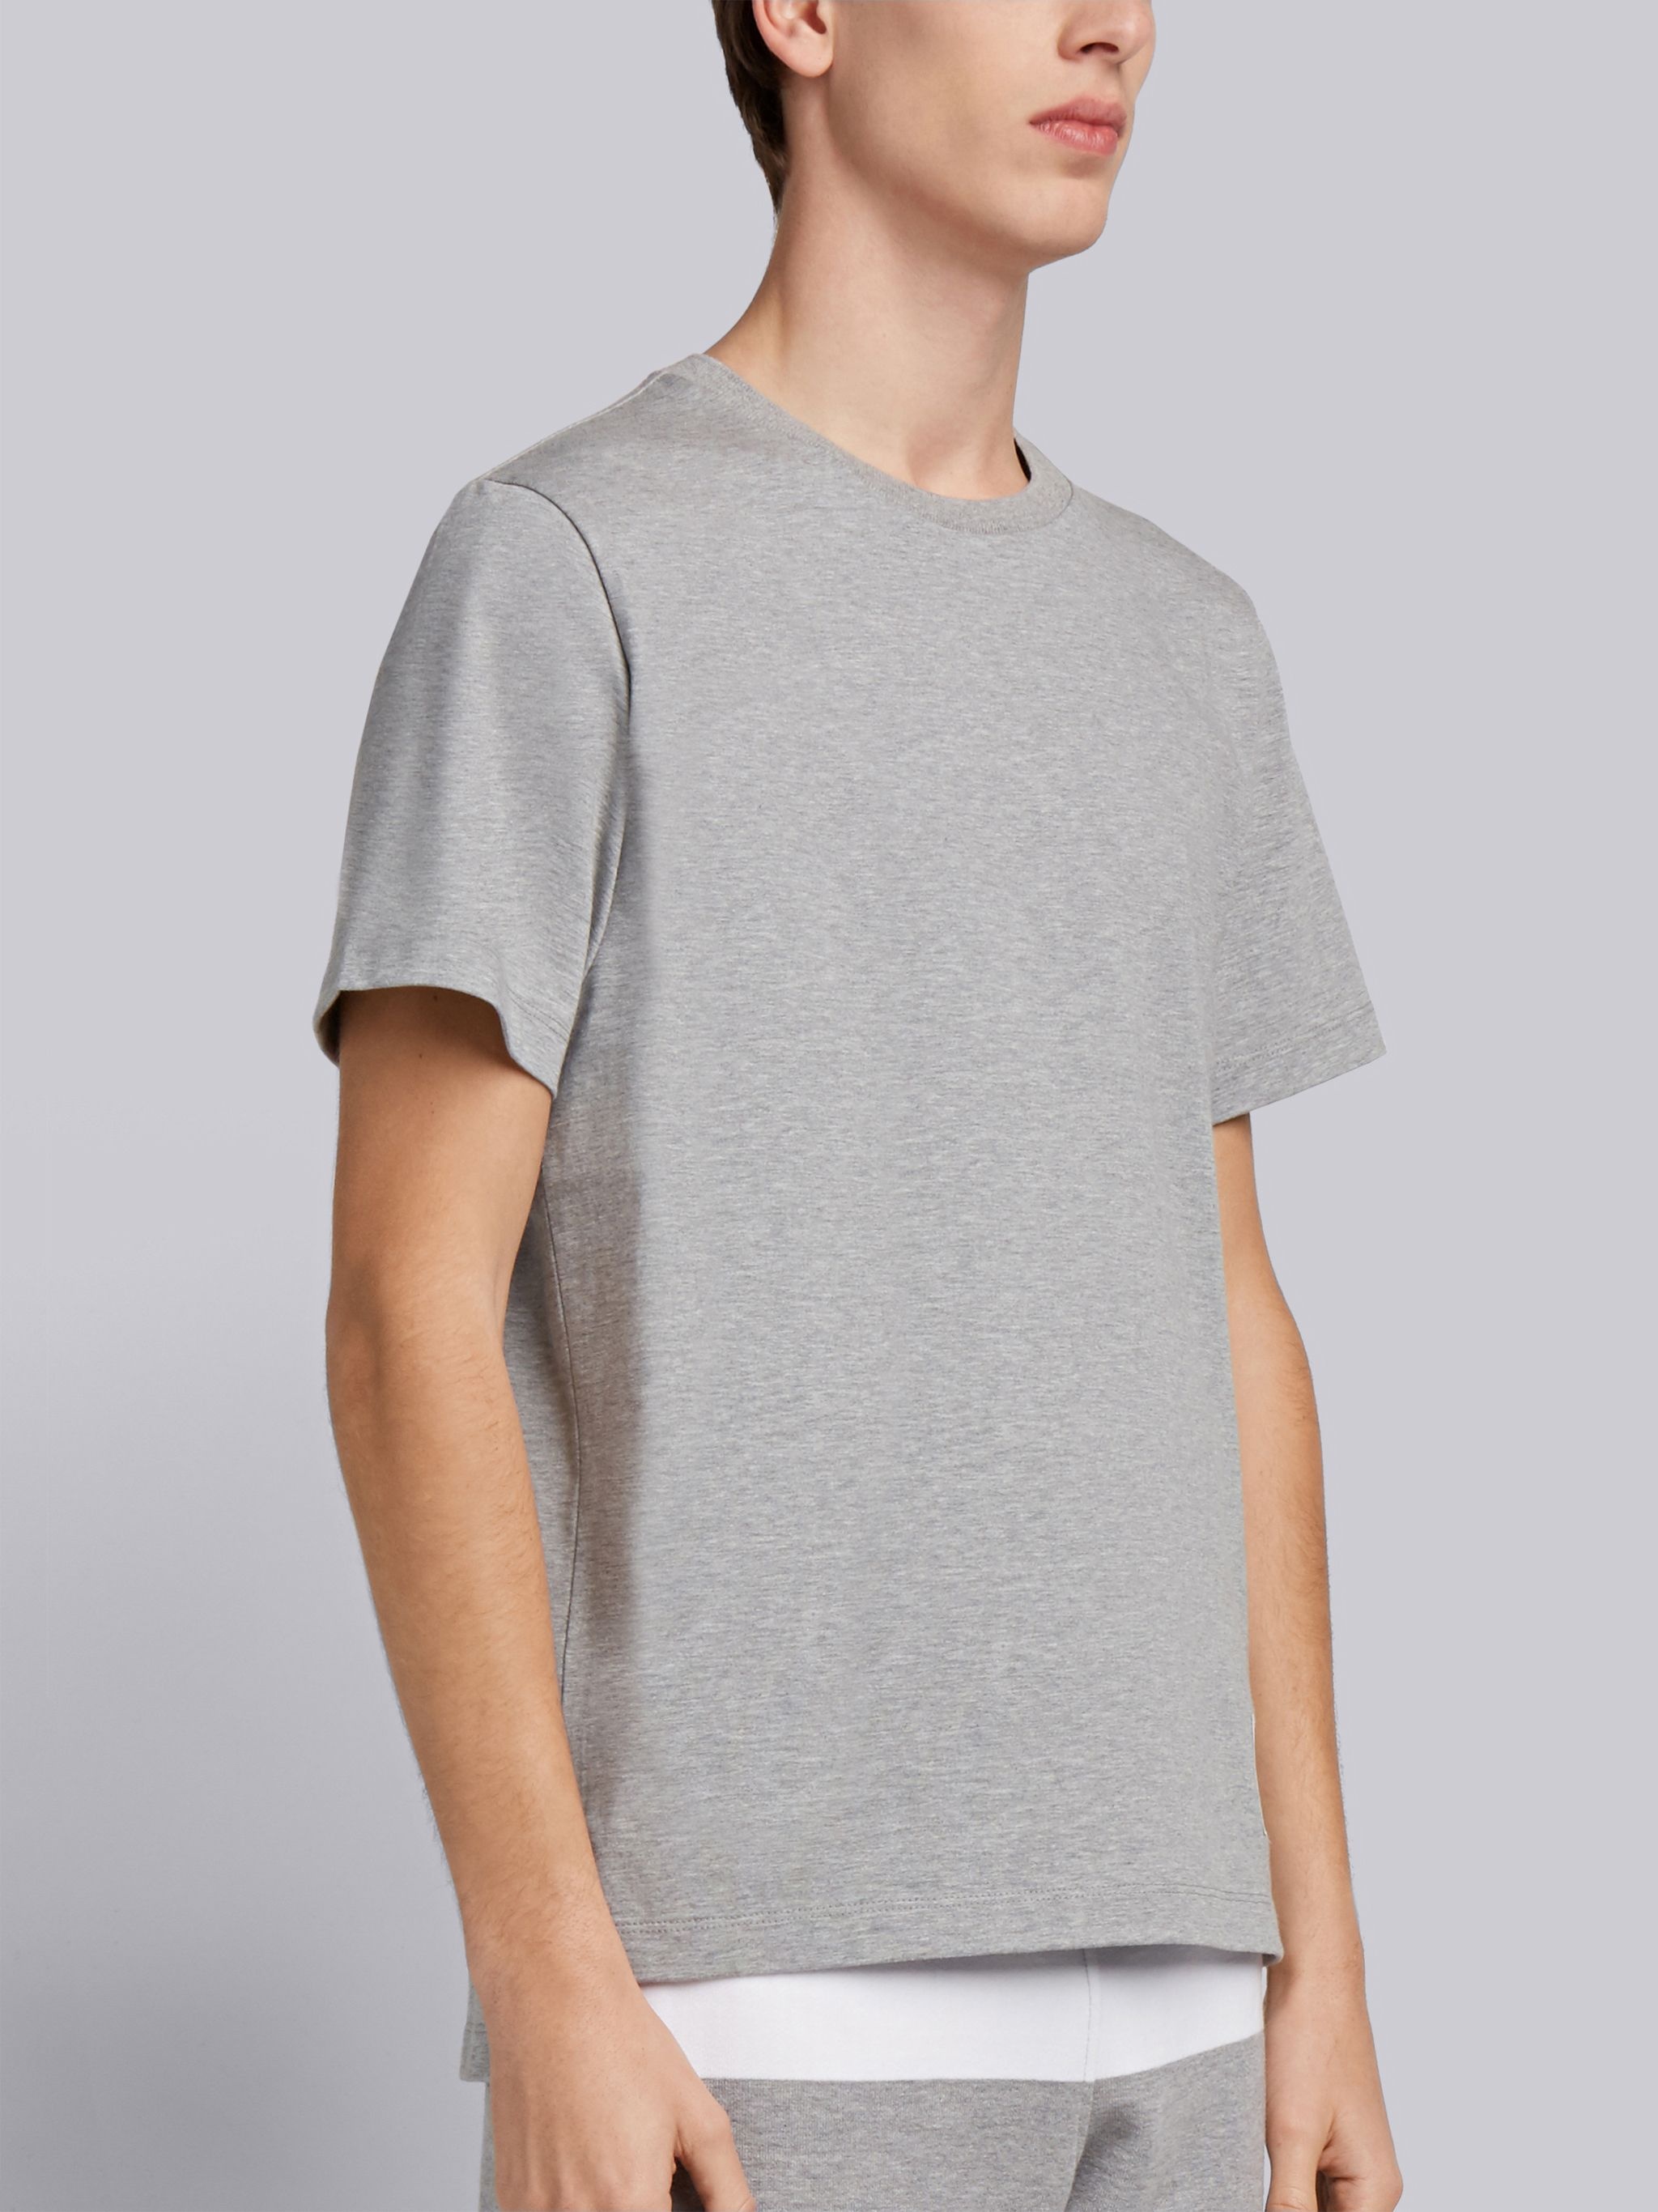 Light Grey Medium Weight Jersey Side Slit Relaxed Fit Tee - 2